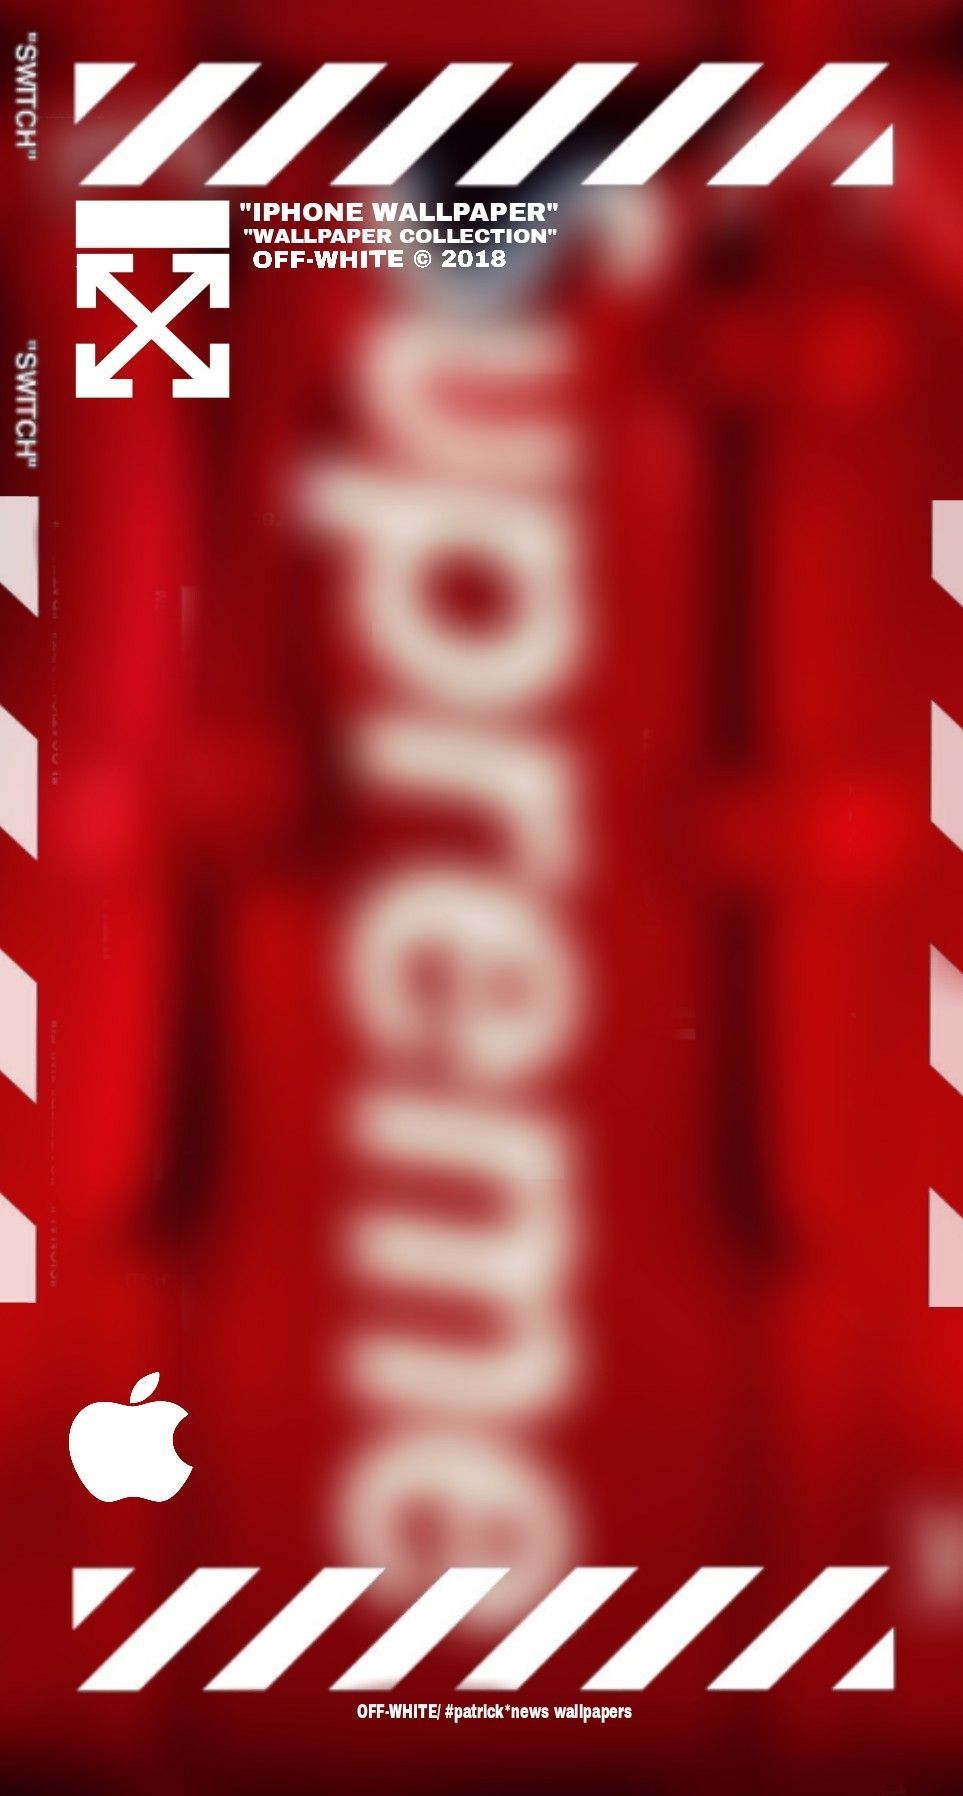 Off white Supreme wallpaper iphone7 Wallpapers in 2019